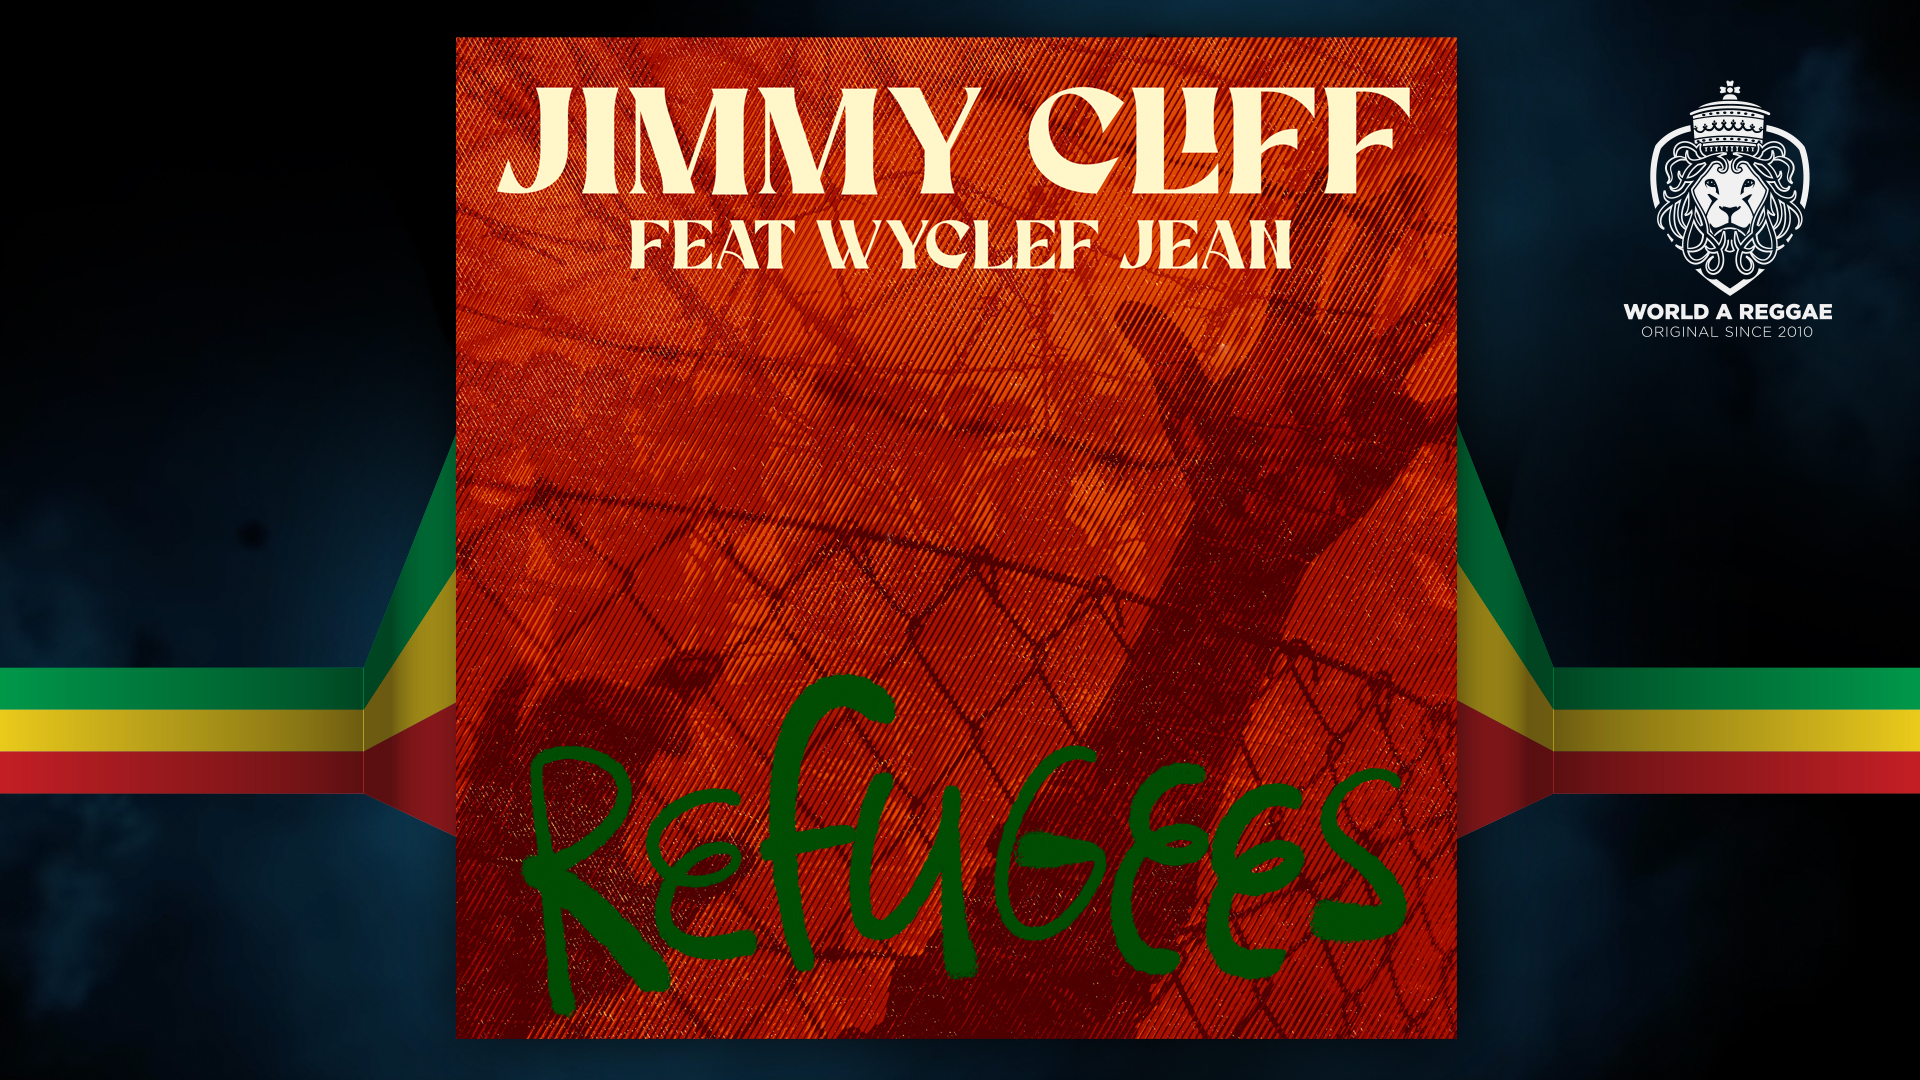 Refugees Jimmy Cliff